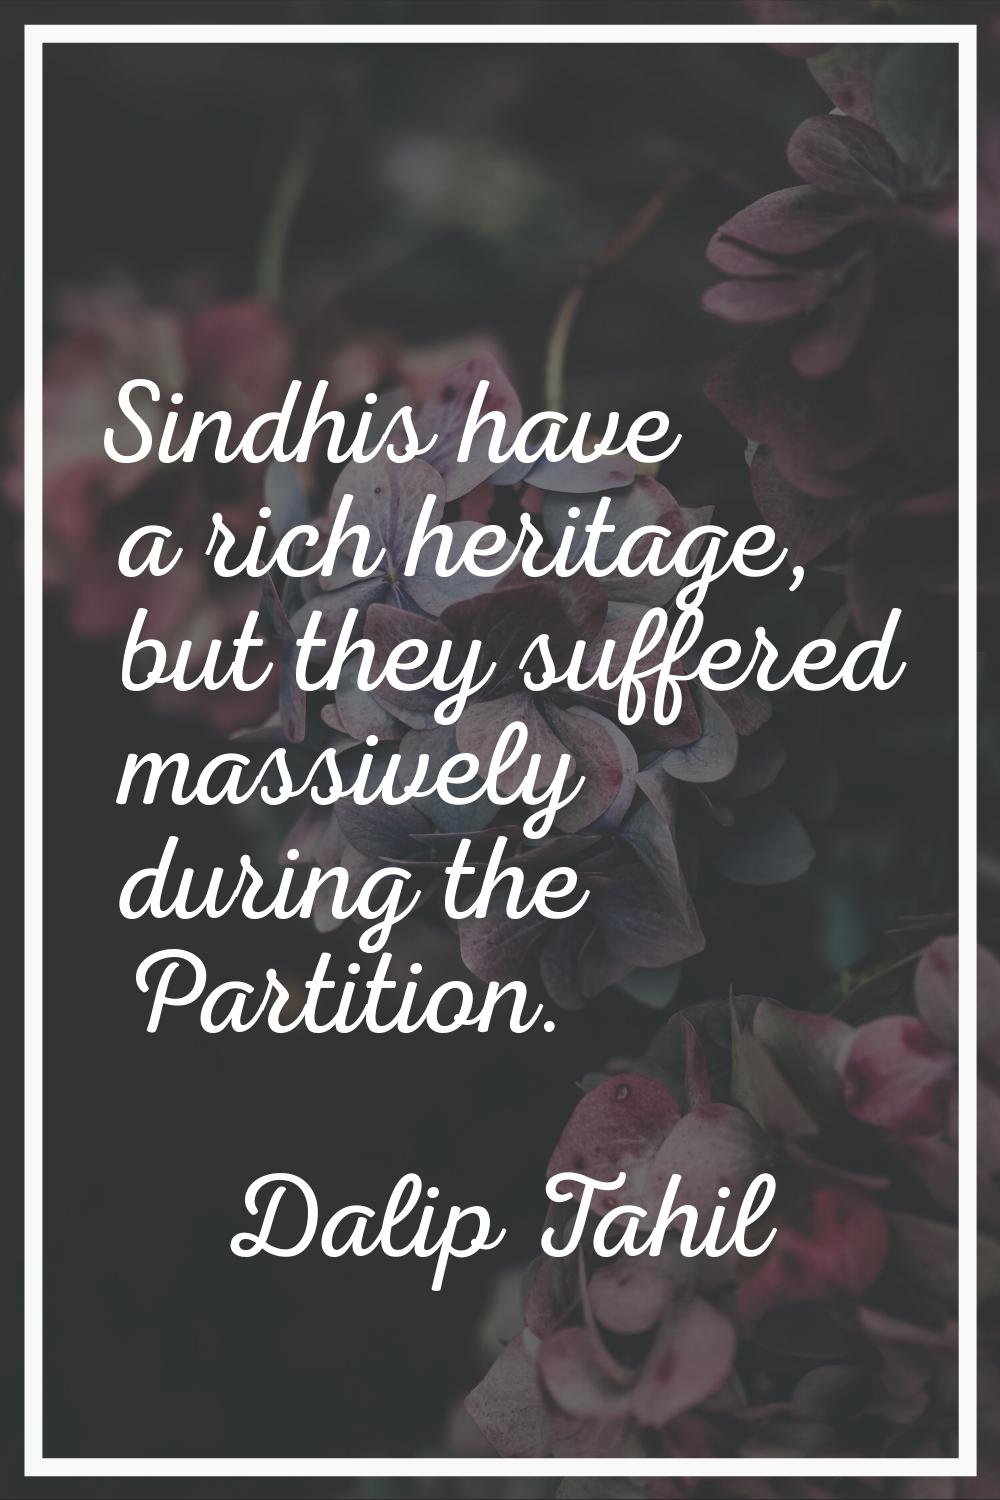 Sindhis have a rich heritage, but they suffered massively during the Partition.